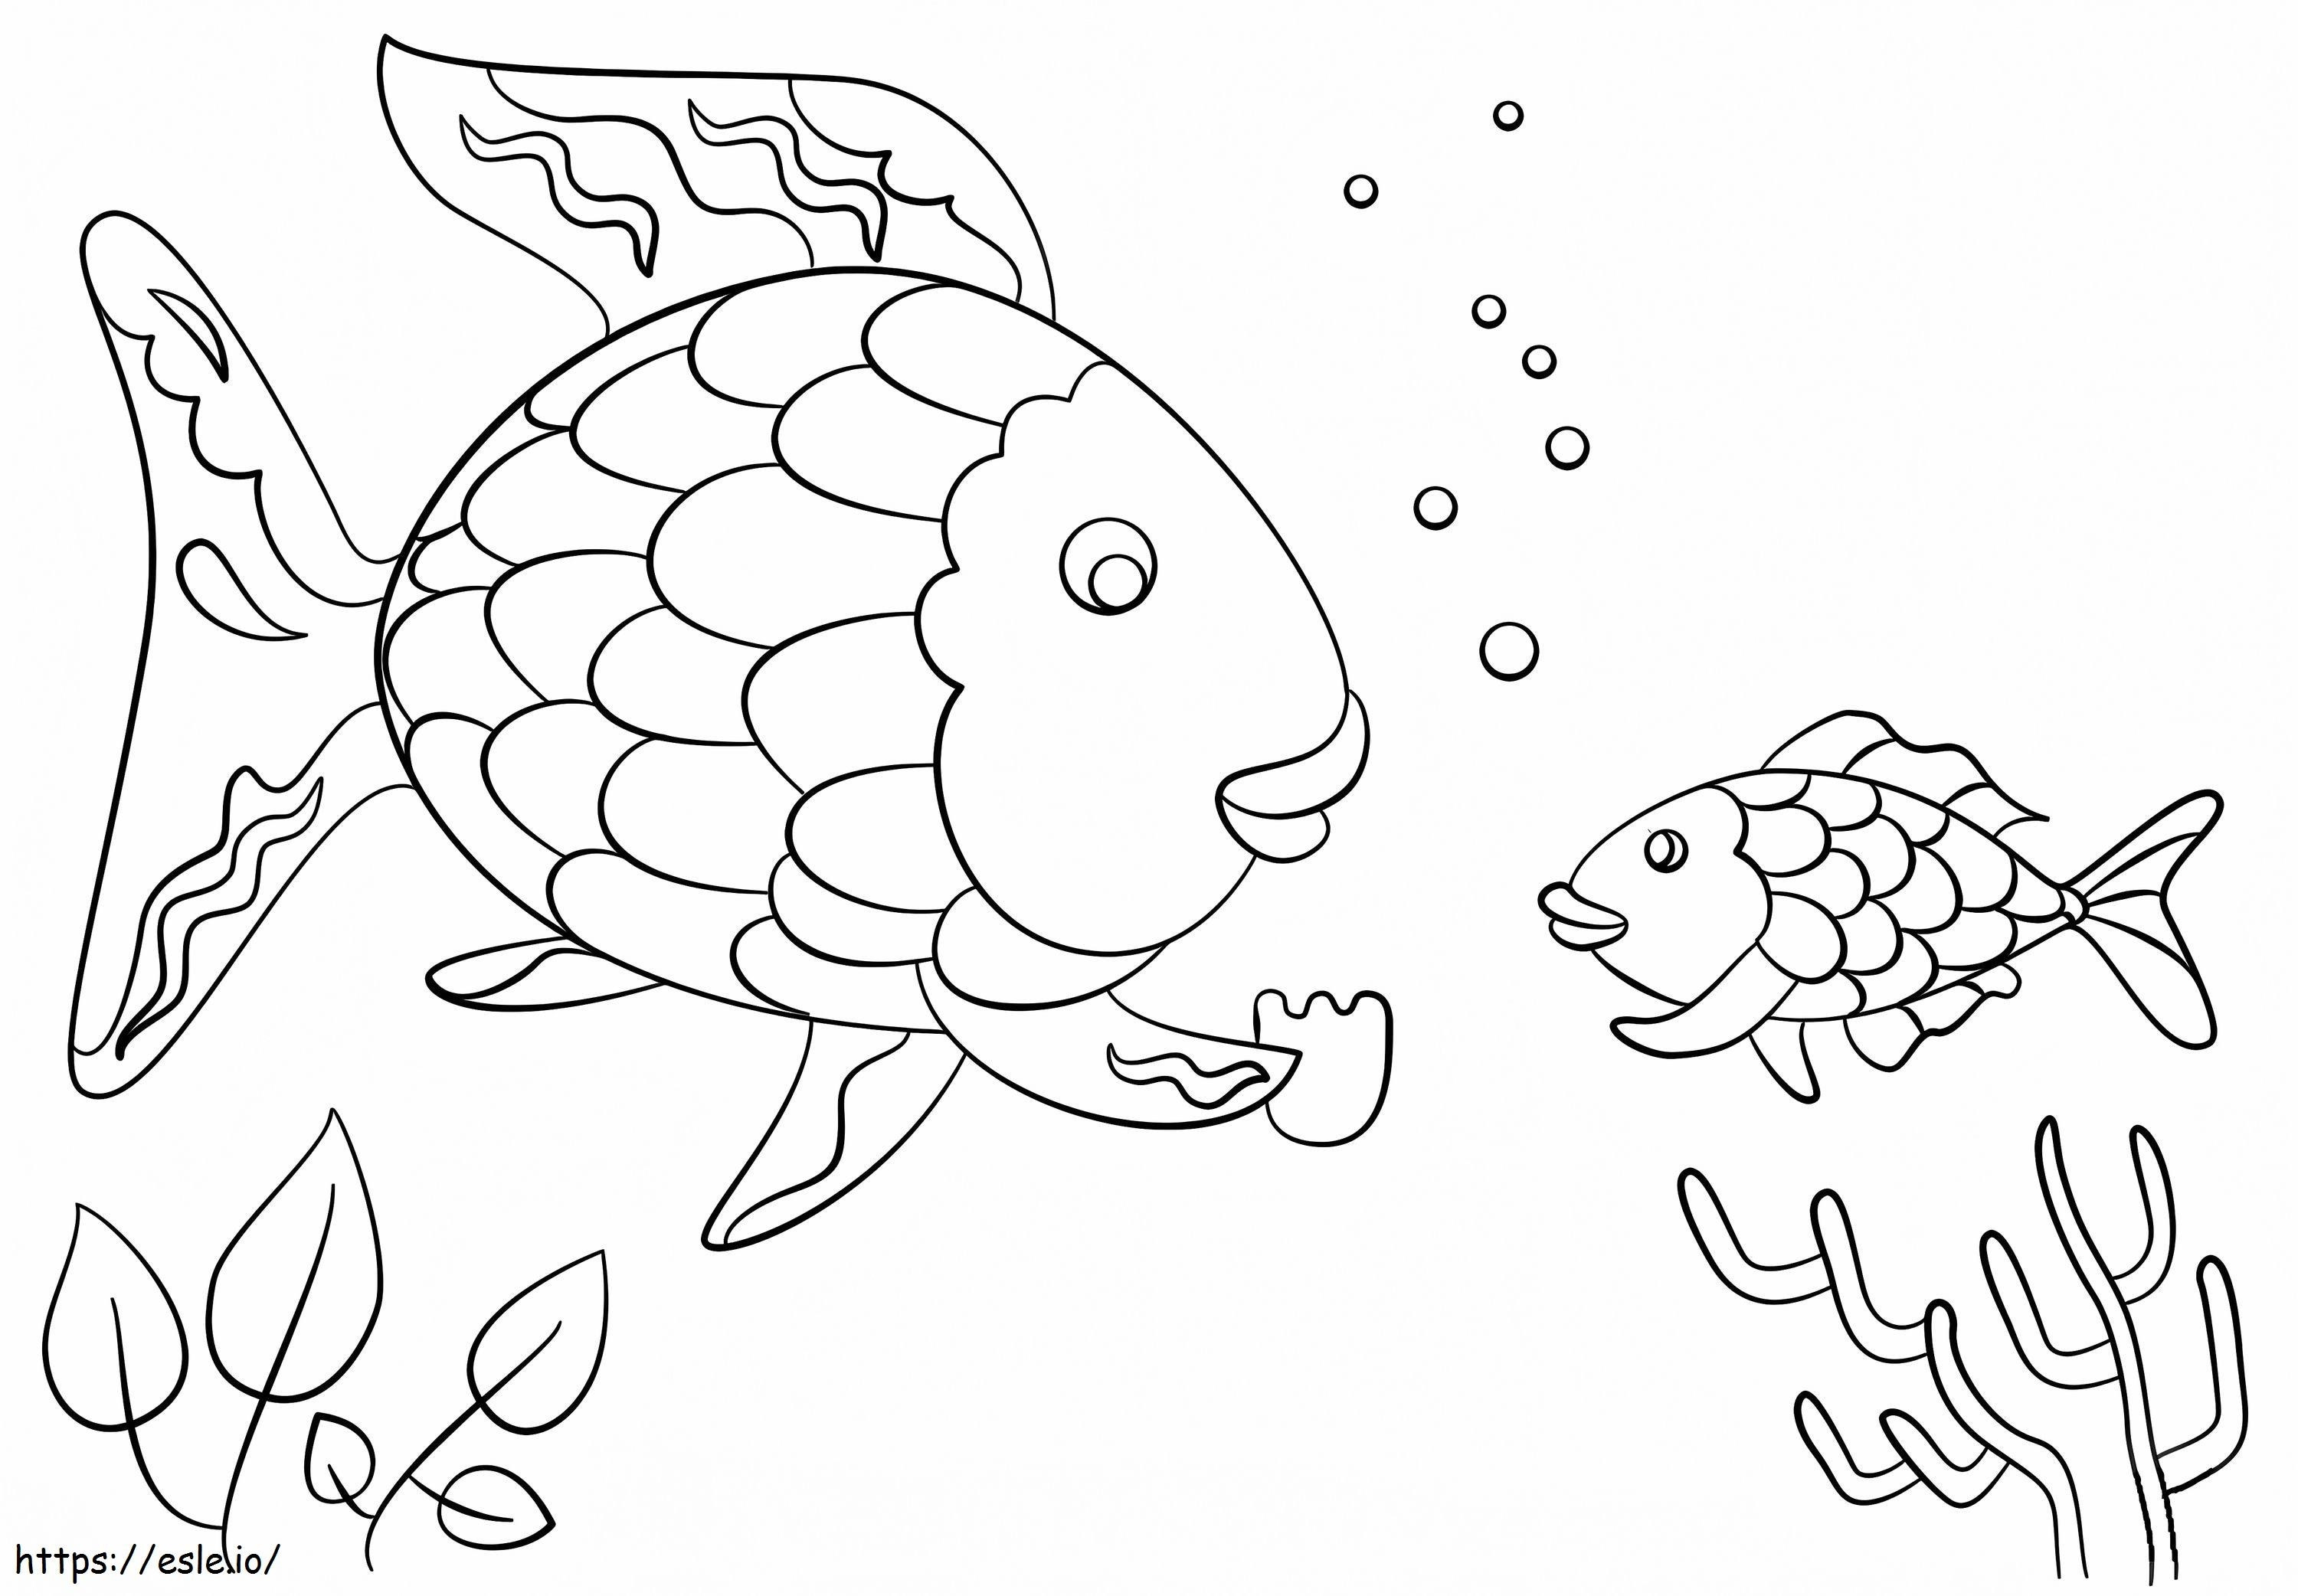 Rainbow Fish Gives A Precious Scales To Small Fish coloring page